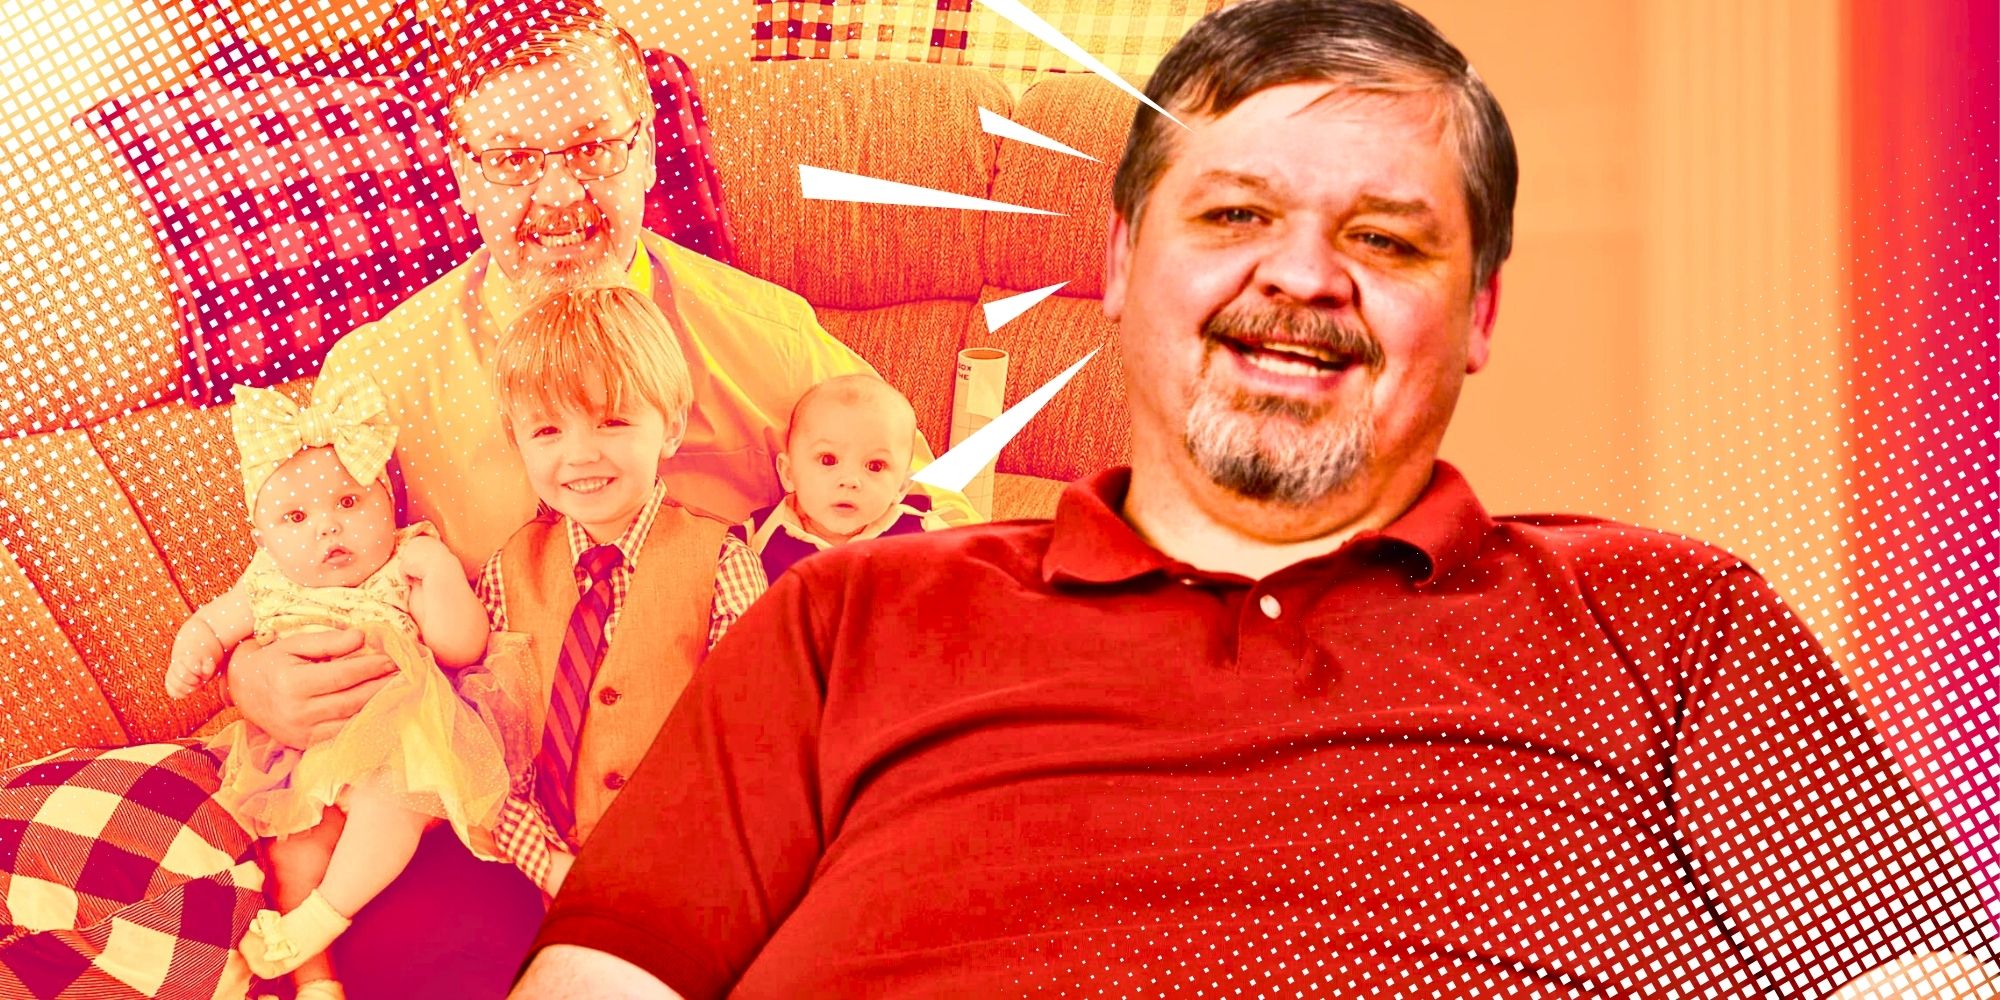 Montage of 1000-Lb Sisters' Chris Combs smiling and posing with his grandkids